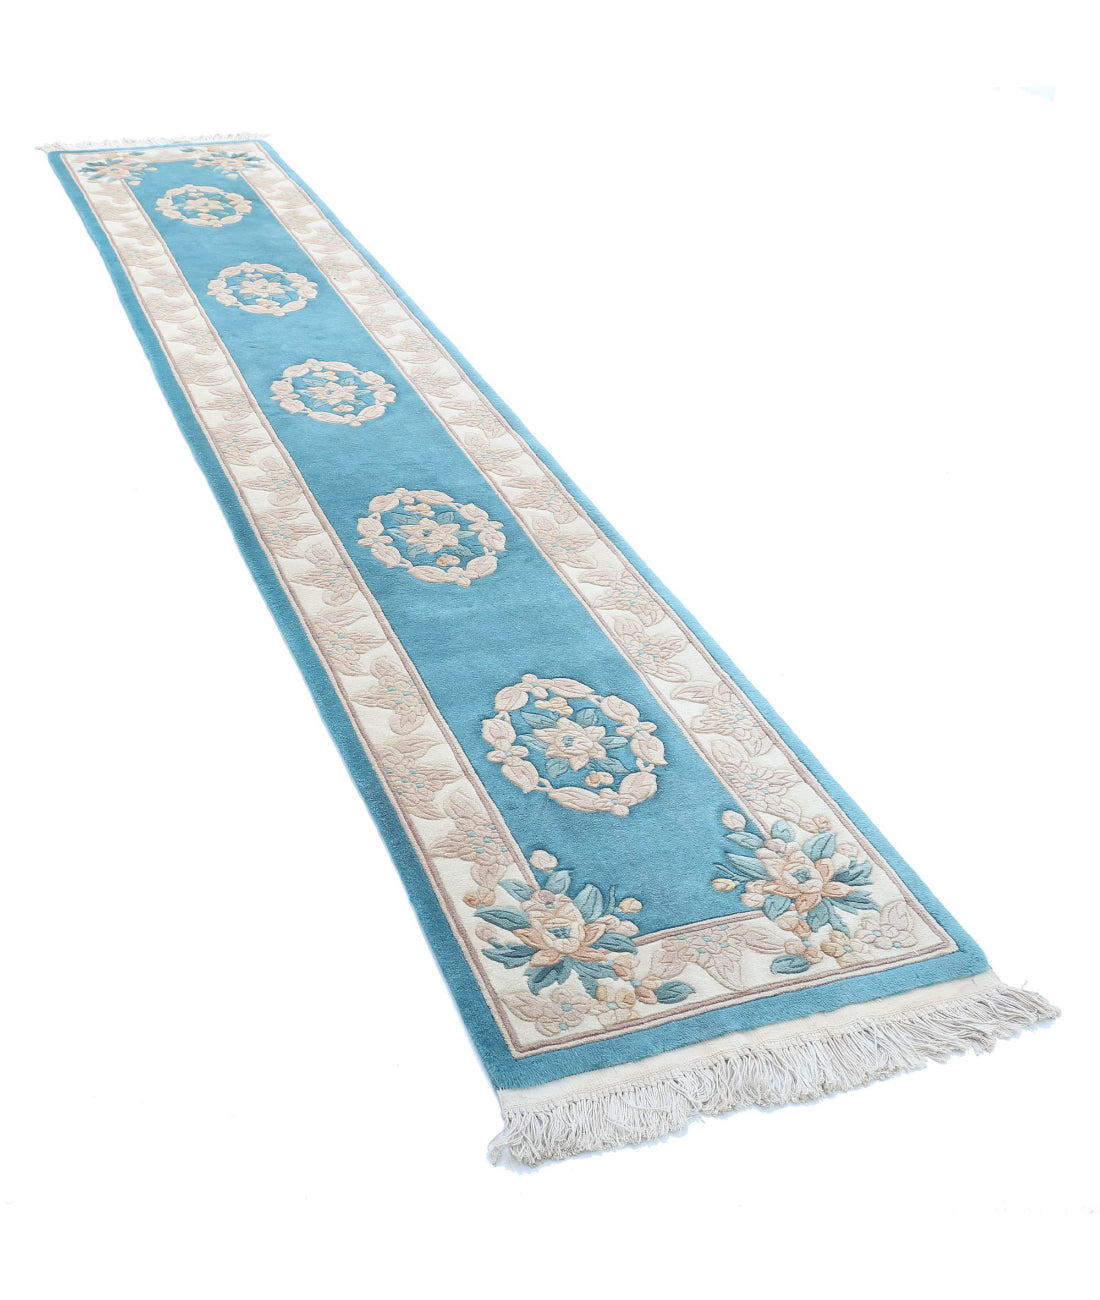 Hand Knotted Chinese Wool Rug - 2'3'' x 11'11'' 2'3'' x 11'11'' (68 X 358) / Blue / Ivory